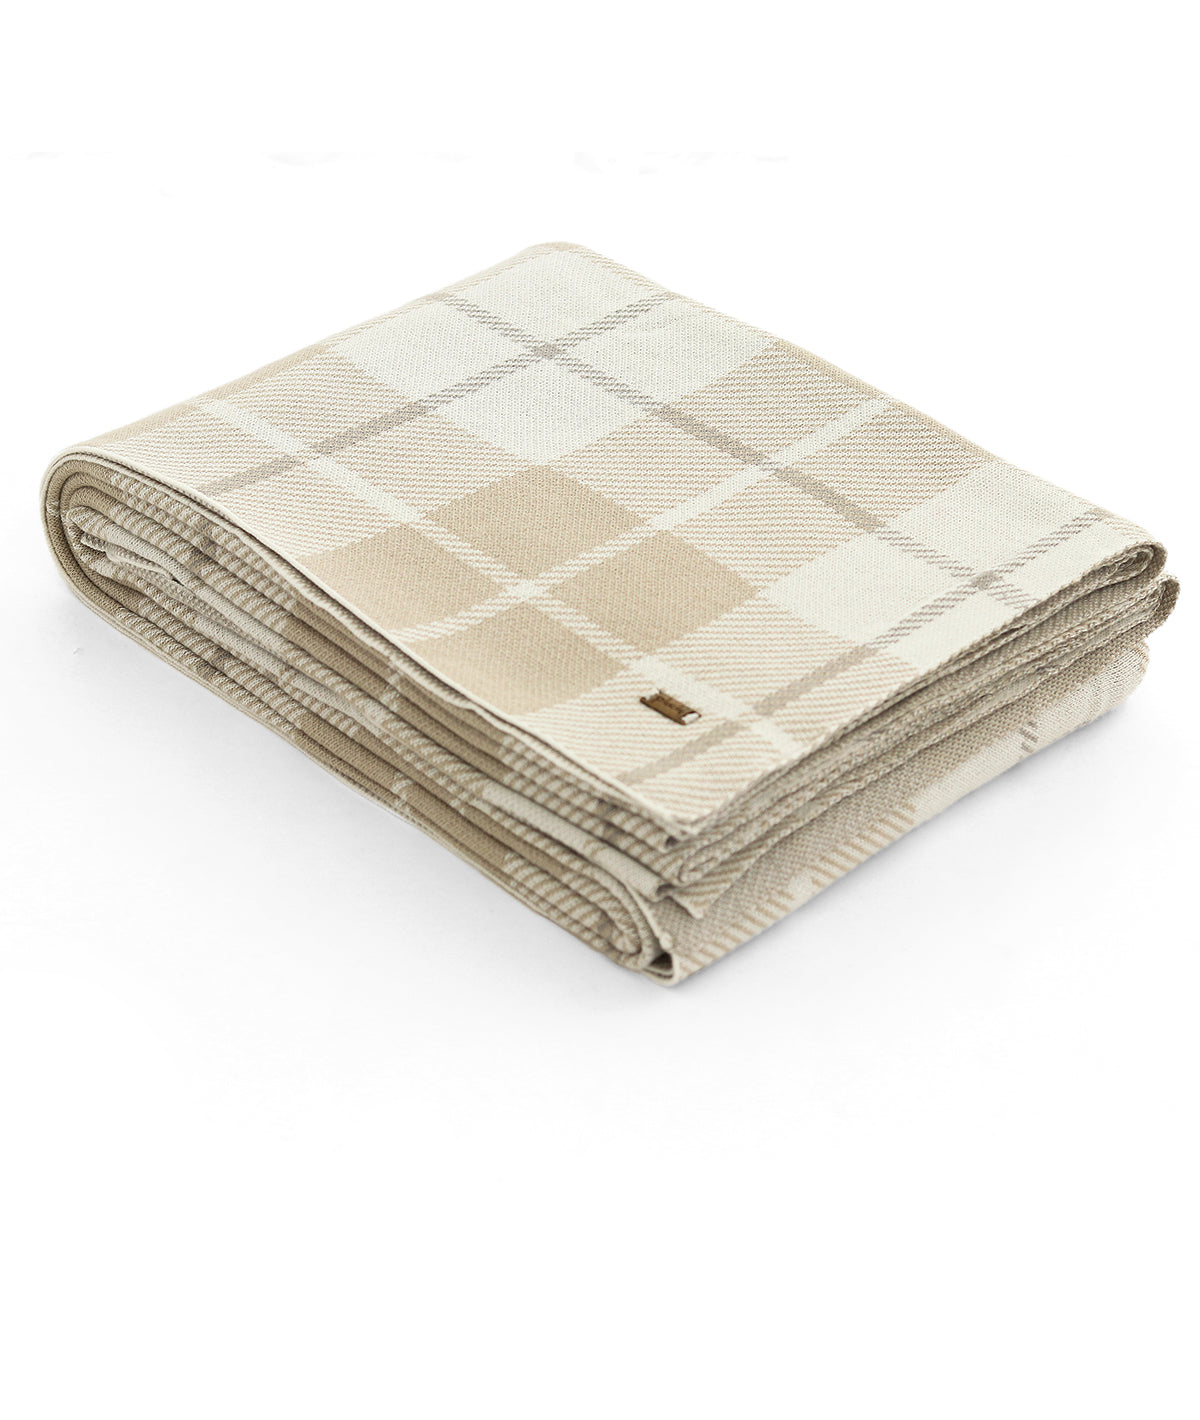 Plaid Oatmeal Cotton Knitted AC Blanket/ Dohar For Round of the Year use (152 cm x 228 cm)